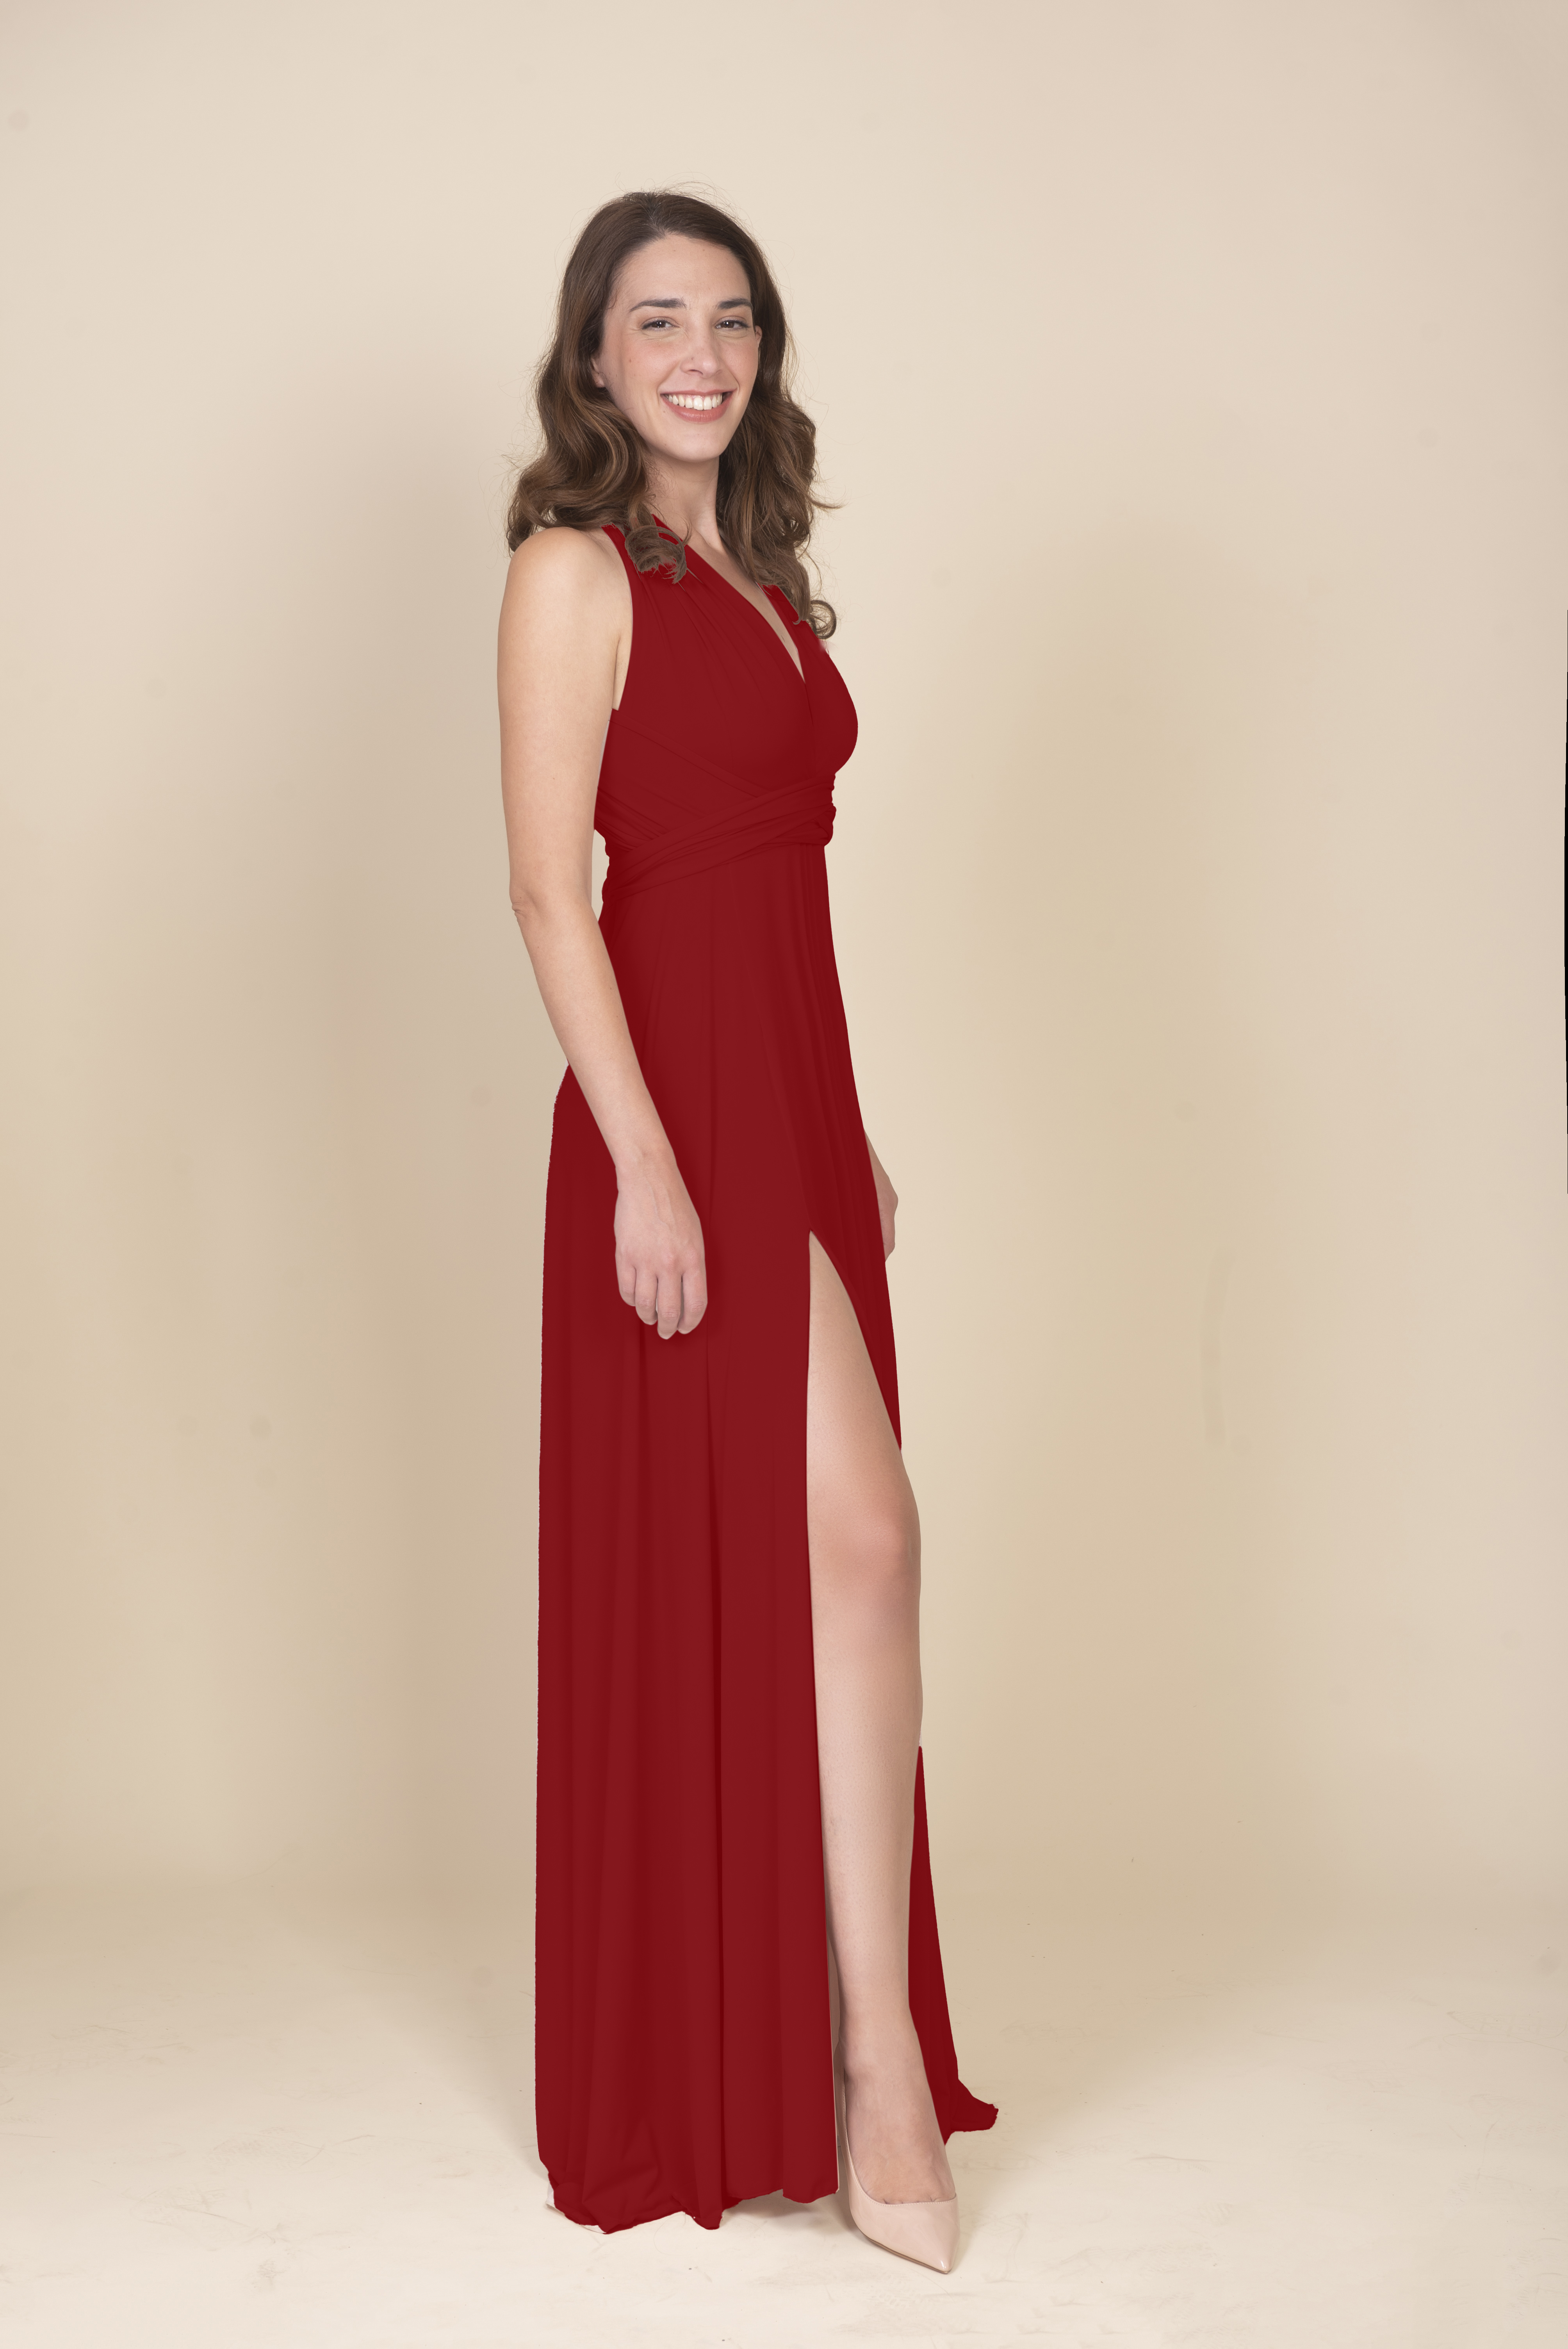 LONG CLASSIC SLIT DRESS IN RED by Infinit Barcelona